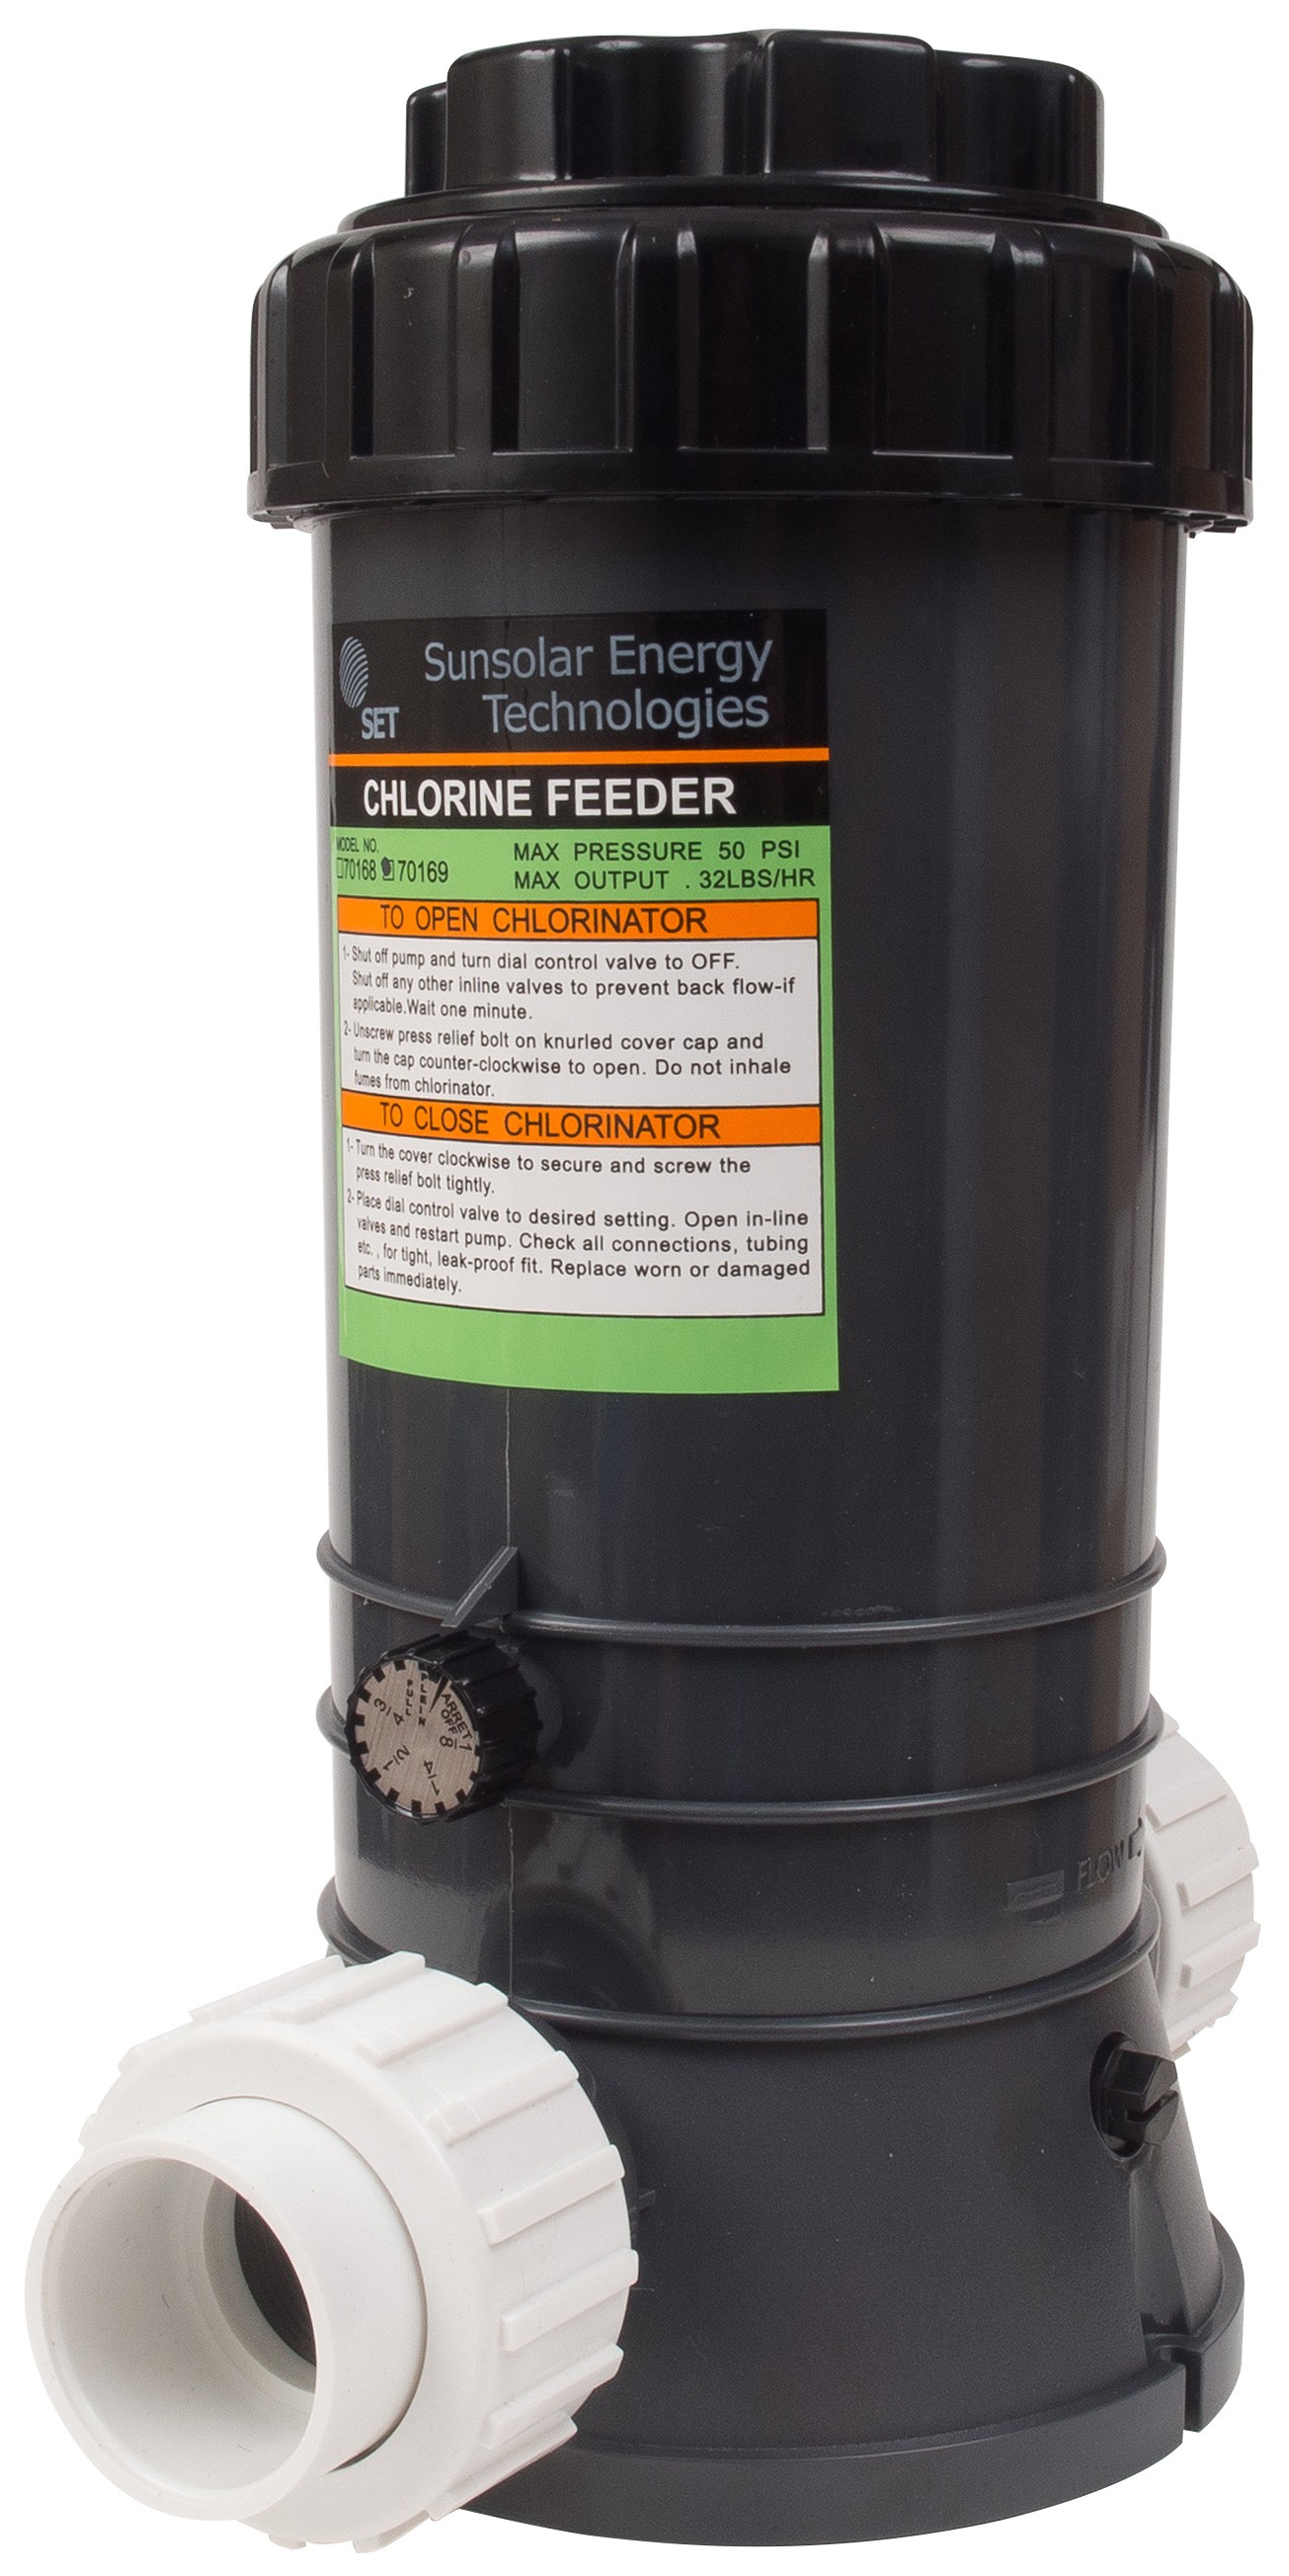 New Automatic Chlorinator for Swimming Pools In-Line 9 Lbs with Union Fittings